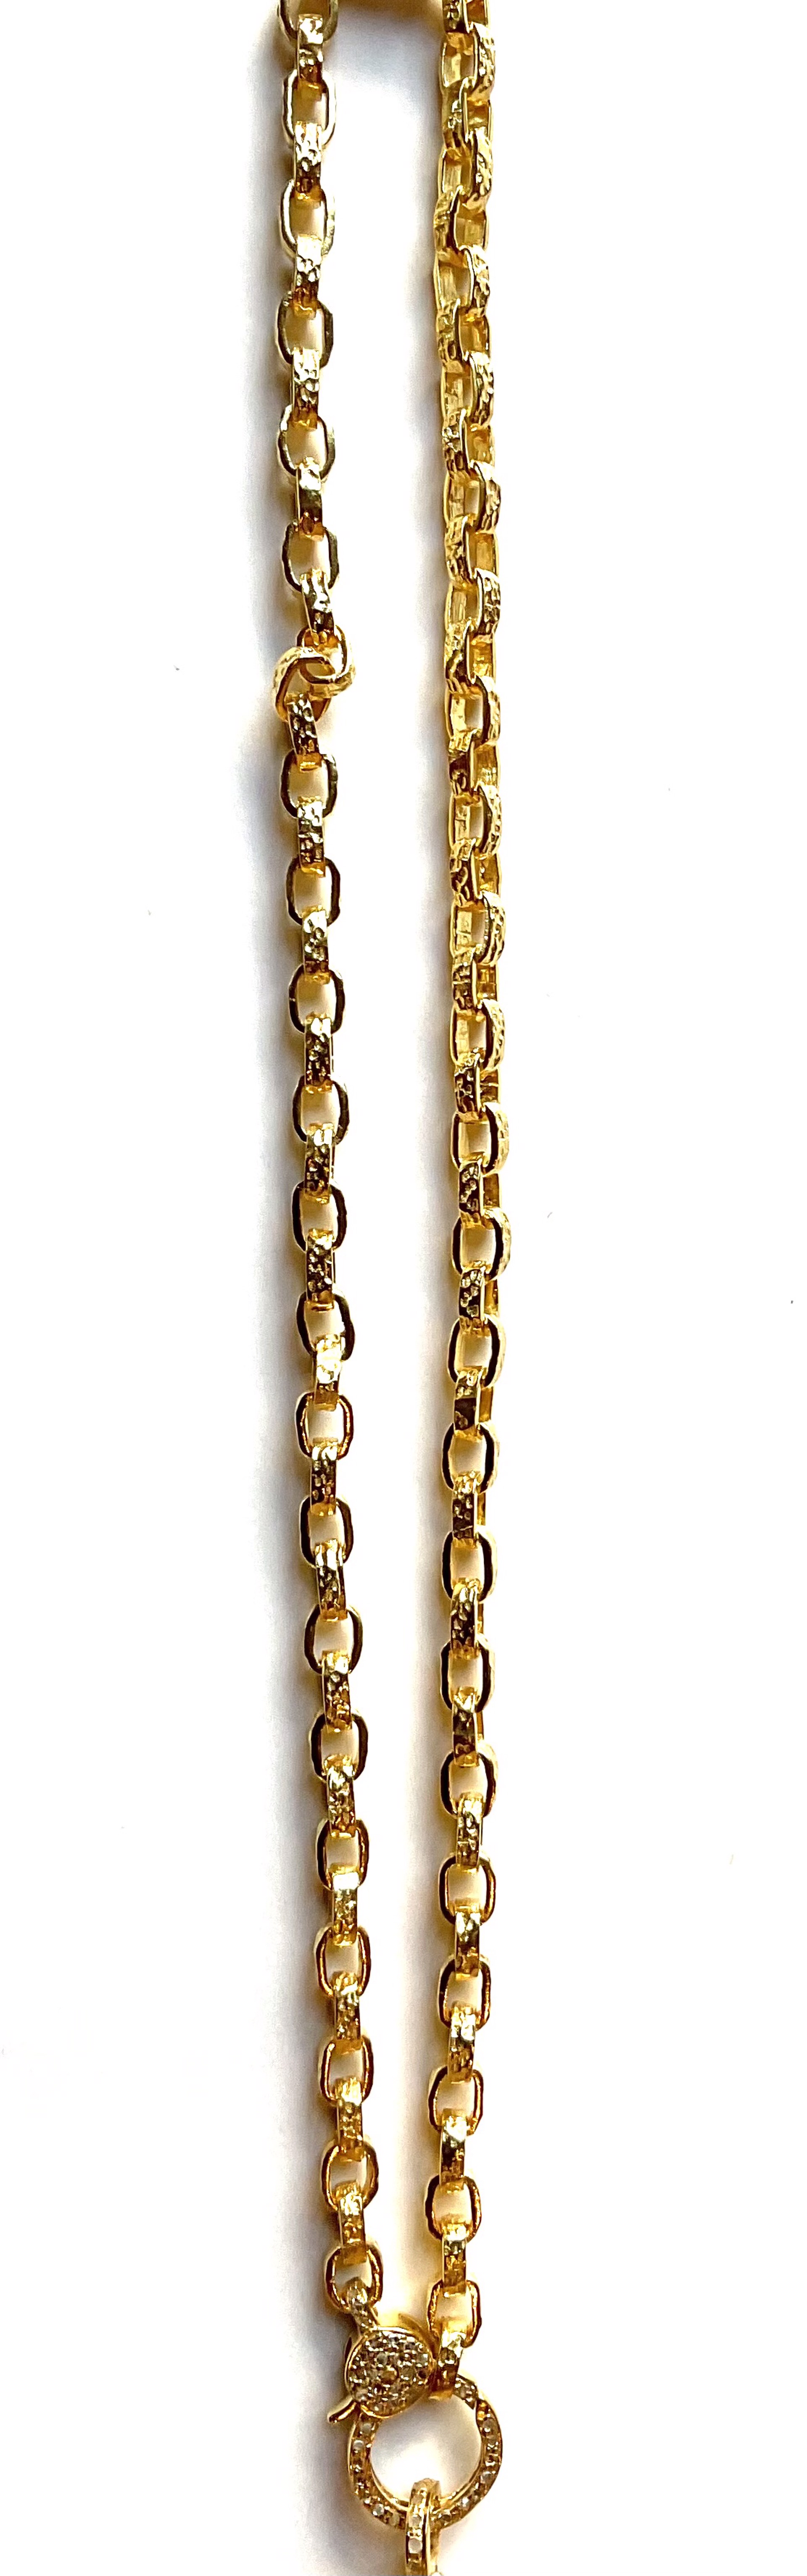 KB-N135 GVML Hammered Cable Chain wDiamond Clasp by Karen Birchmier